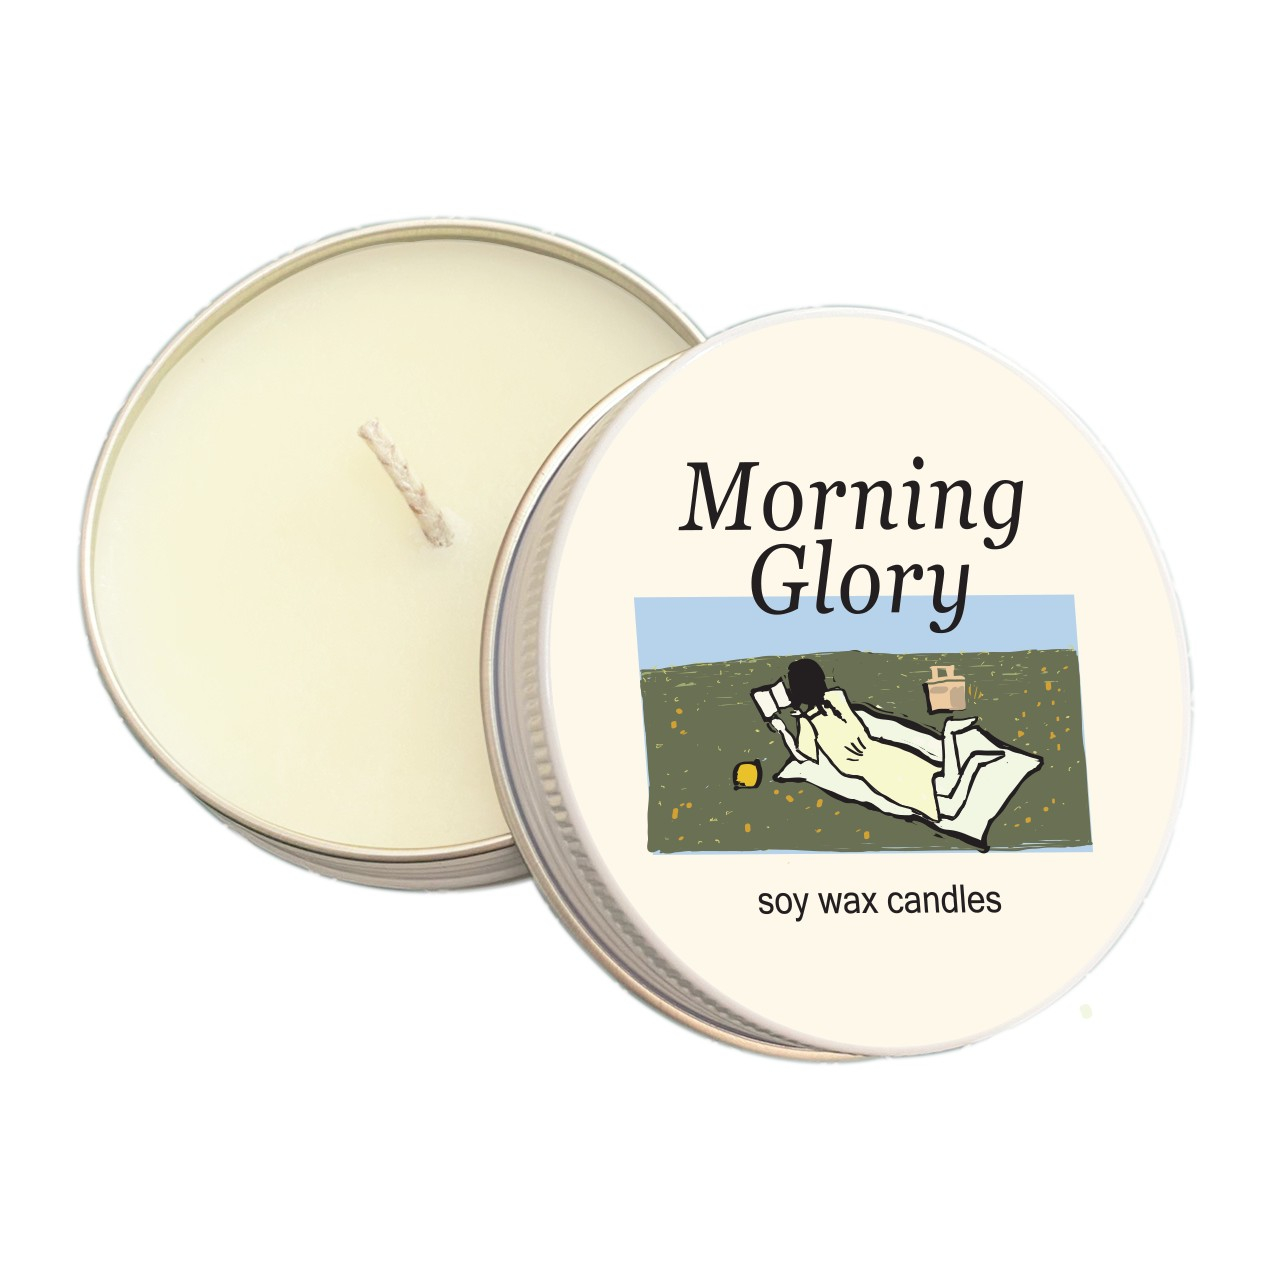 Morning glory soy wax candle